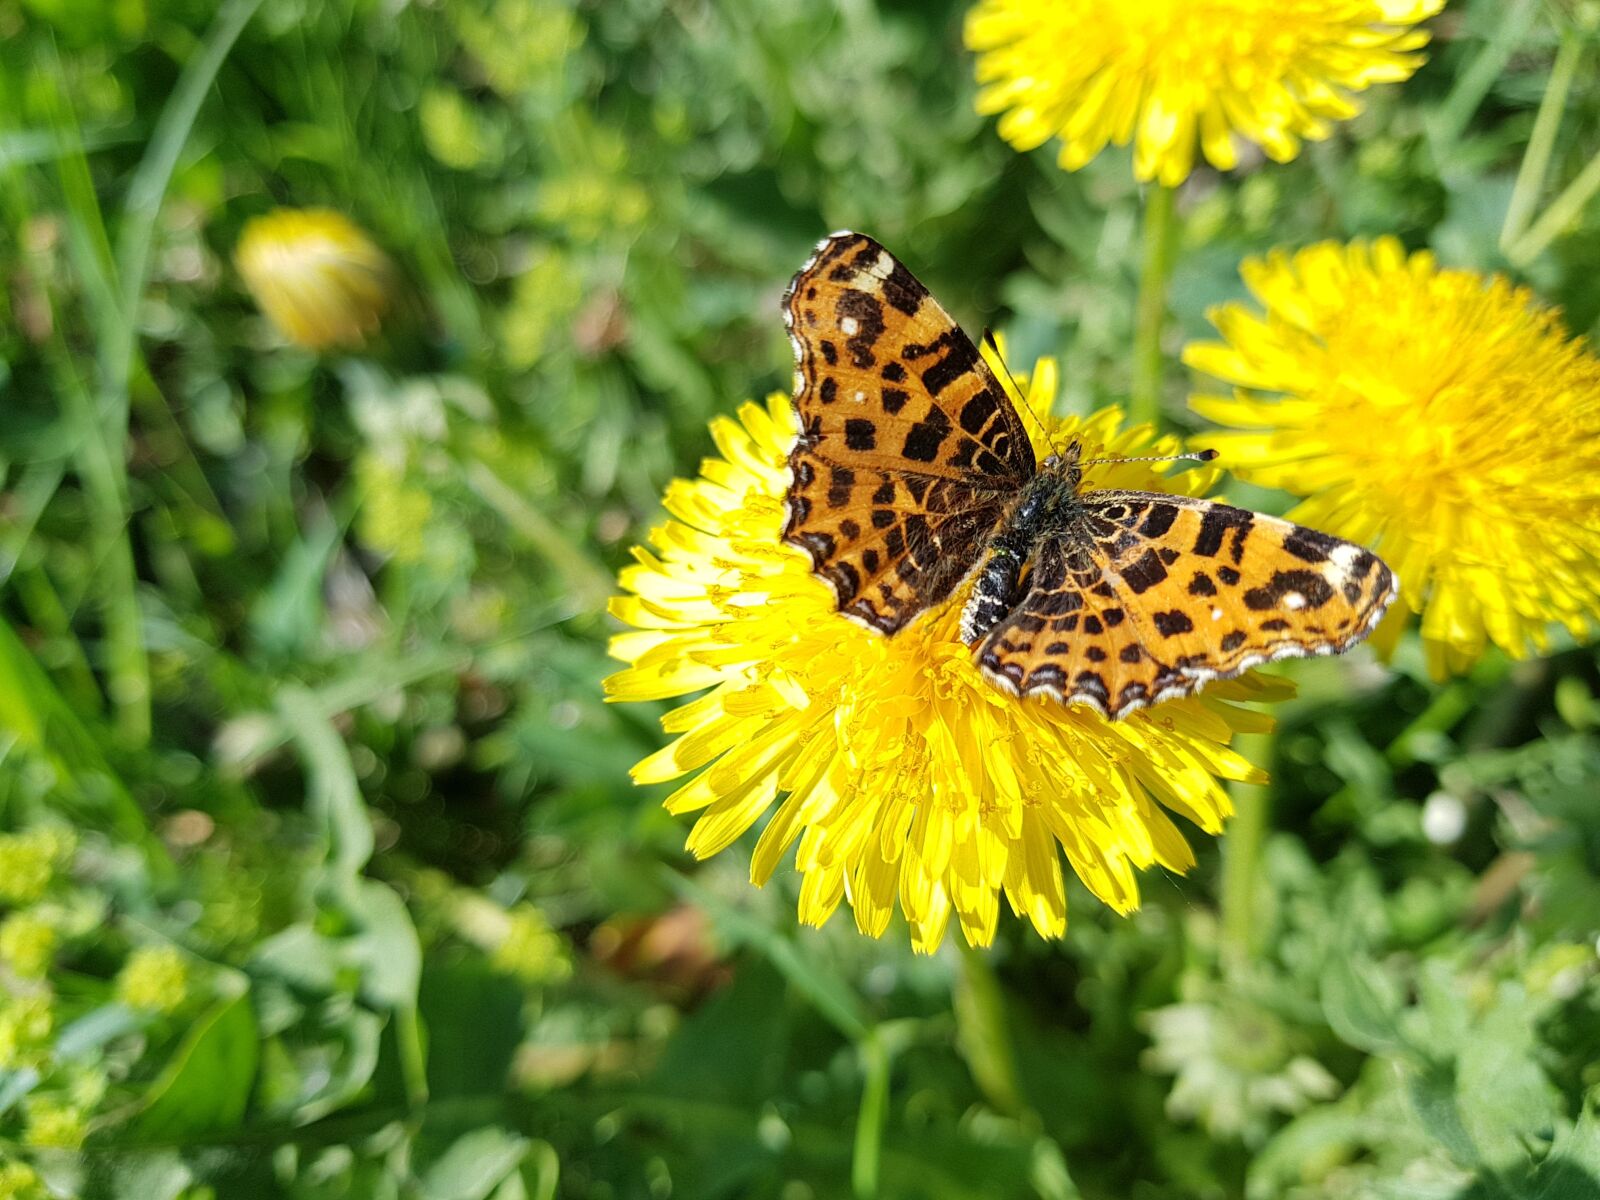 Samsung Galaxy S7 sample photo. Butterfly, dandelions, meadow photography